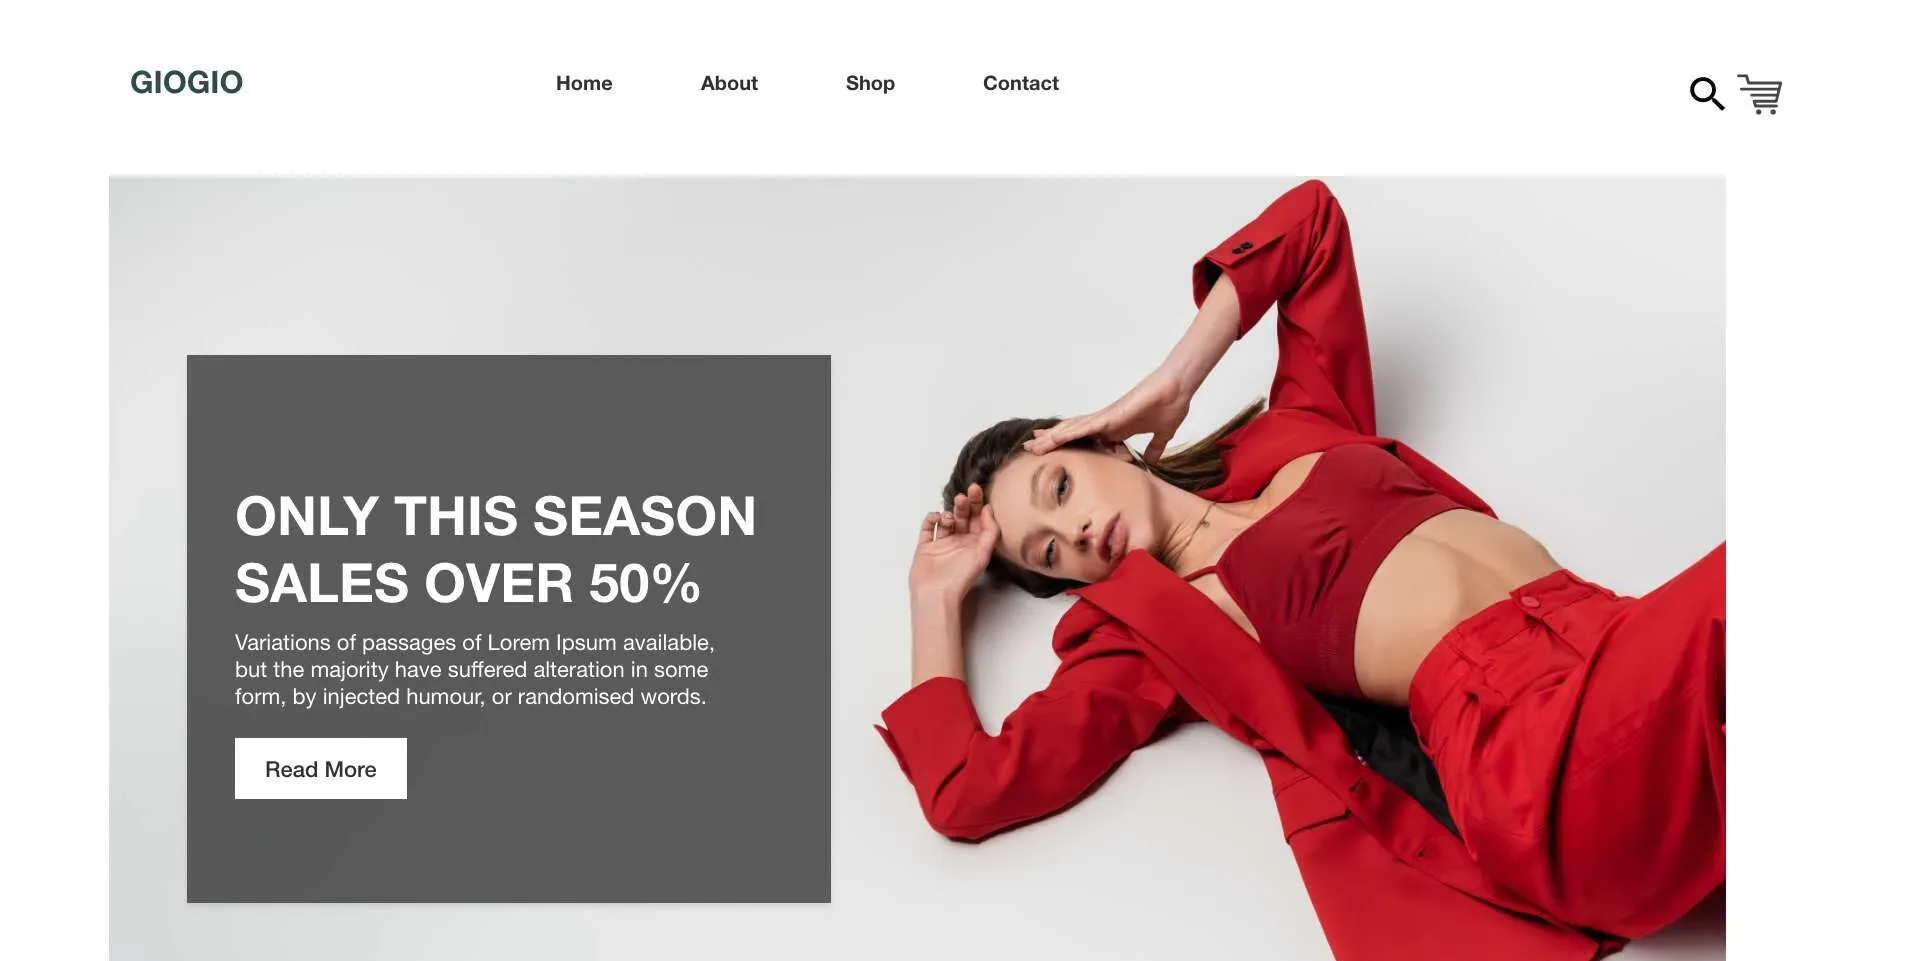 Women's Clothing store expert shopify consulting services